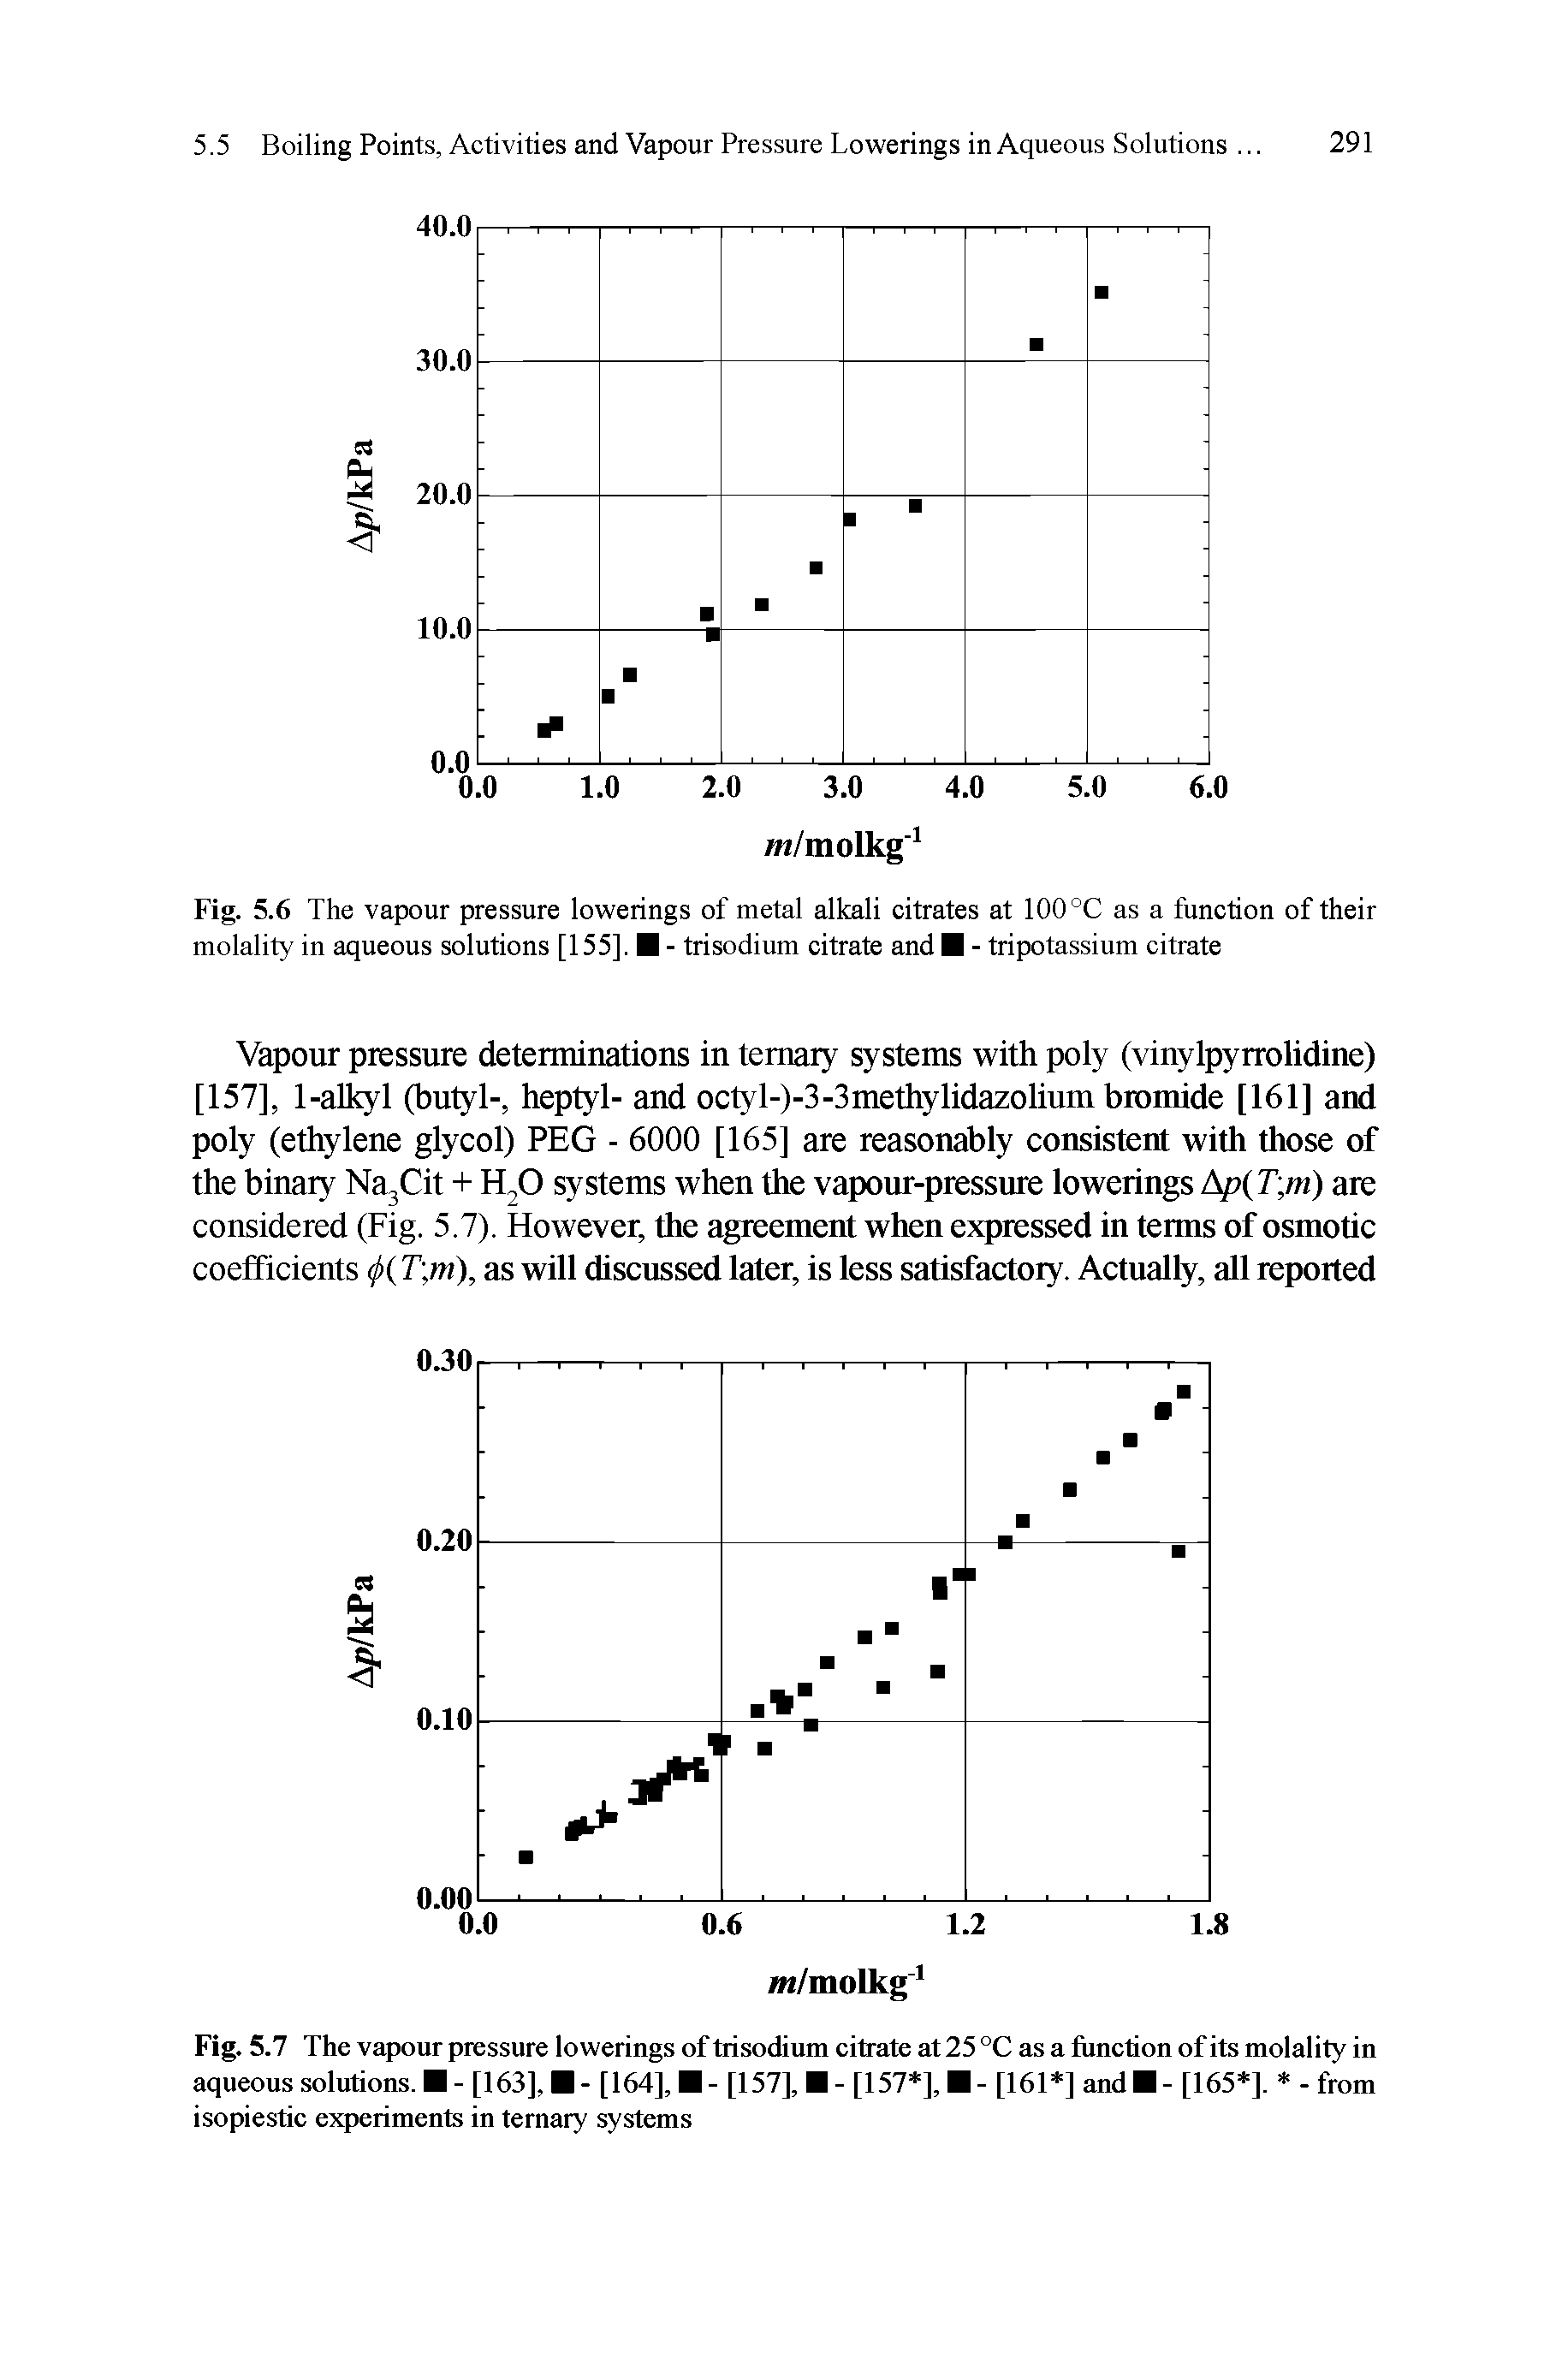 Fig. 5.7 The vapour pressure lowerings of trisodium citrate at 25 °C as a function of its molality in aqueous solutions. - [163], - [164], - [157], - [157 ], - [161 ] andB- [165 ]. - from isopiestic experiments in ternary systems...